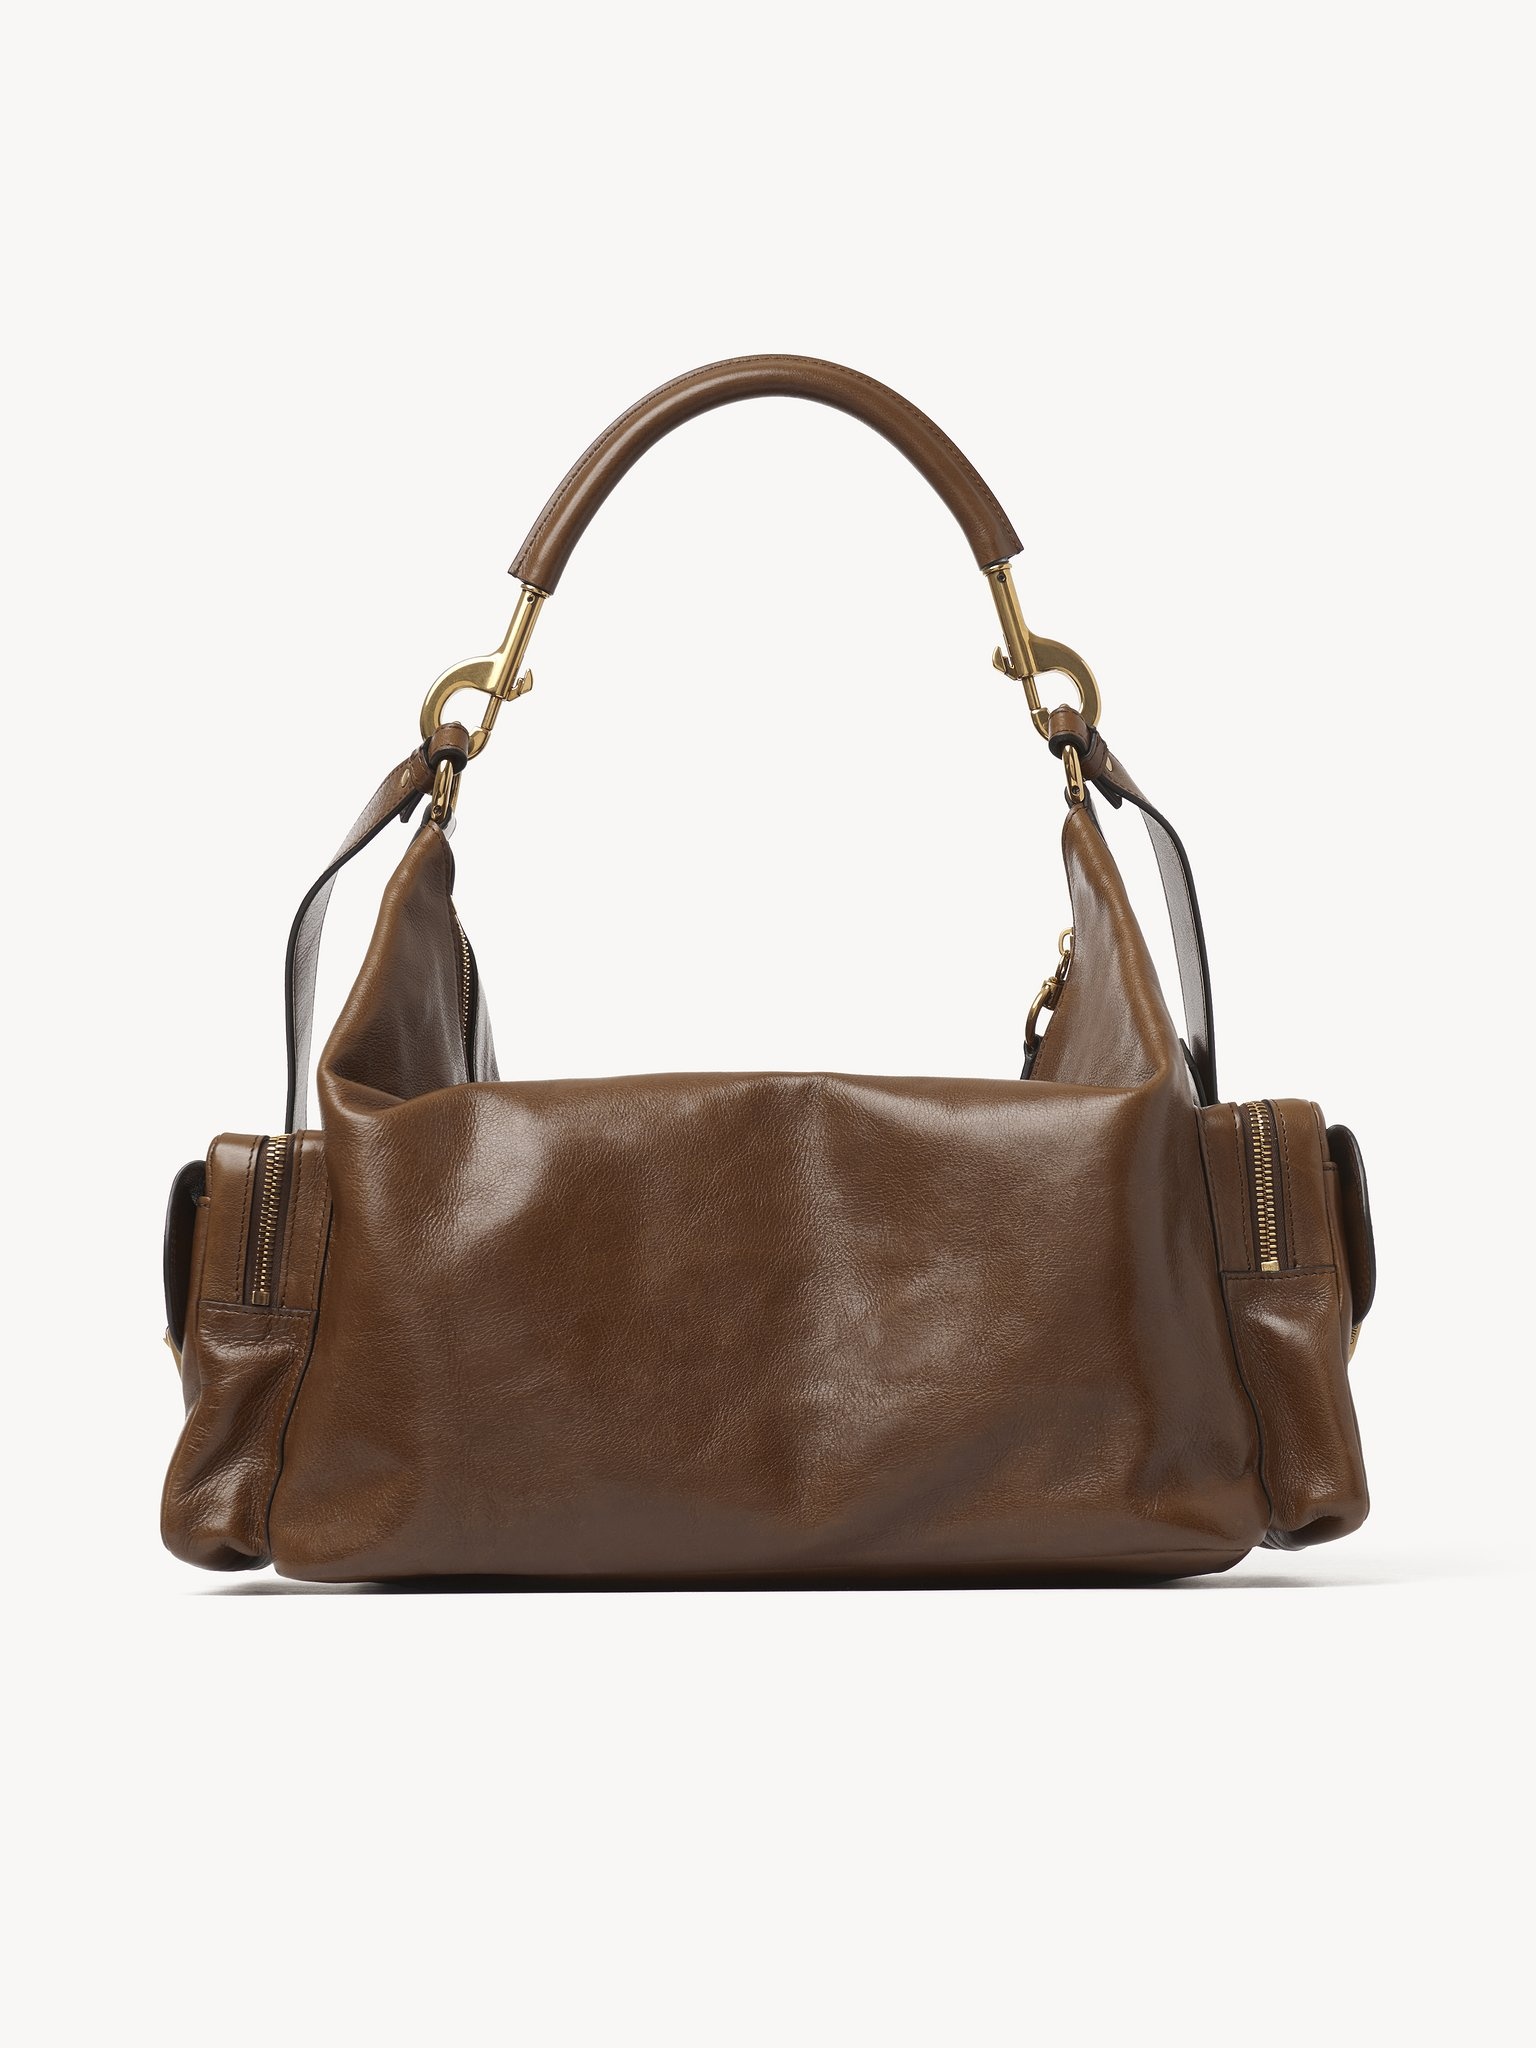 LARGE CAMERA BAG IN SOFT LEATHER - 3